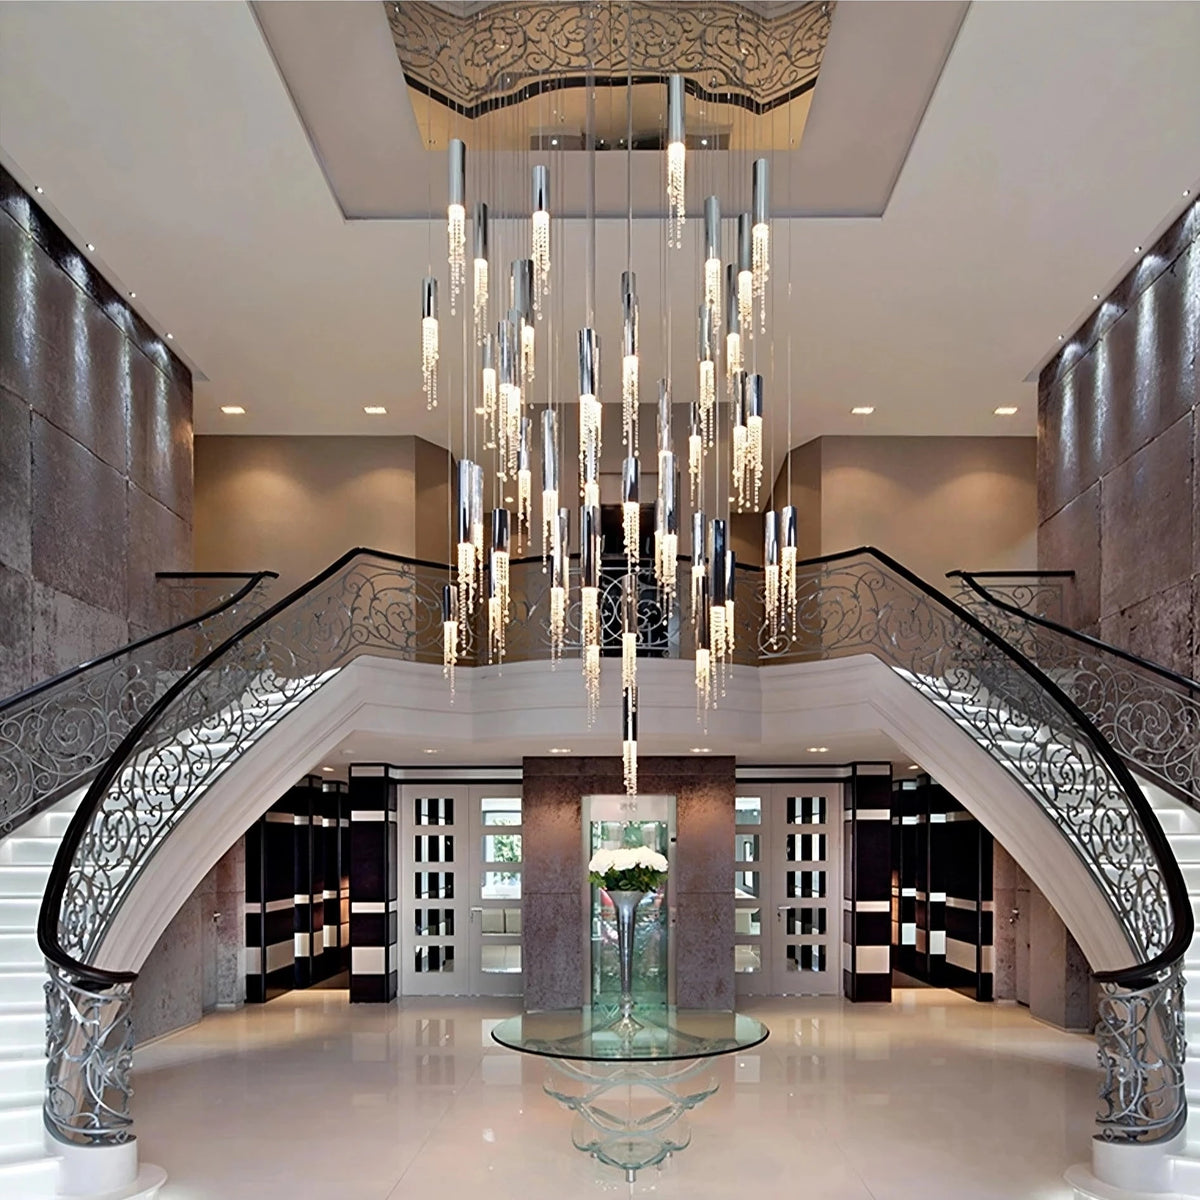 A grand, modern foyer with a double staircase and intricate railings on either side. At the center, a large, elegant Canali Modern Crystal Pendant Chandelier from Morsale.com adorned with clear crystals hangs from the ceiling. The polished floor reflects the light, and a glass table with a floral arrangement stands beneath the chandelier.